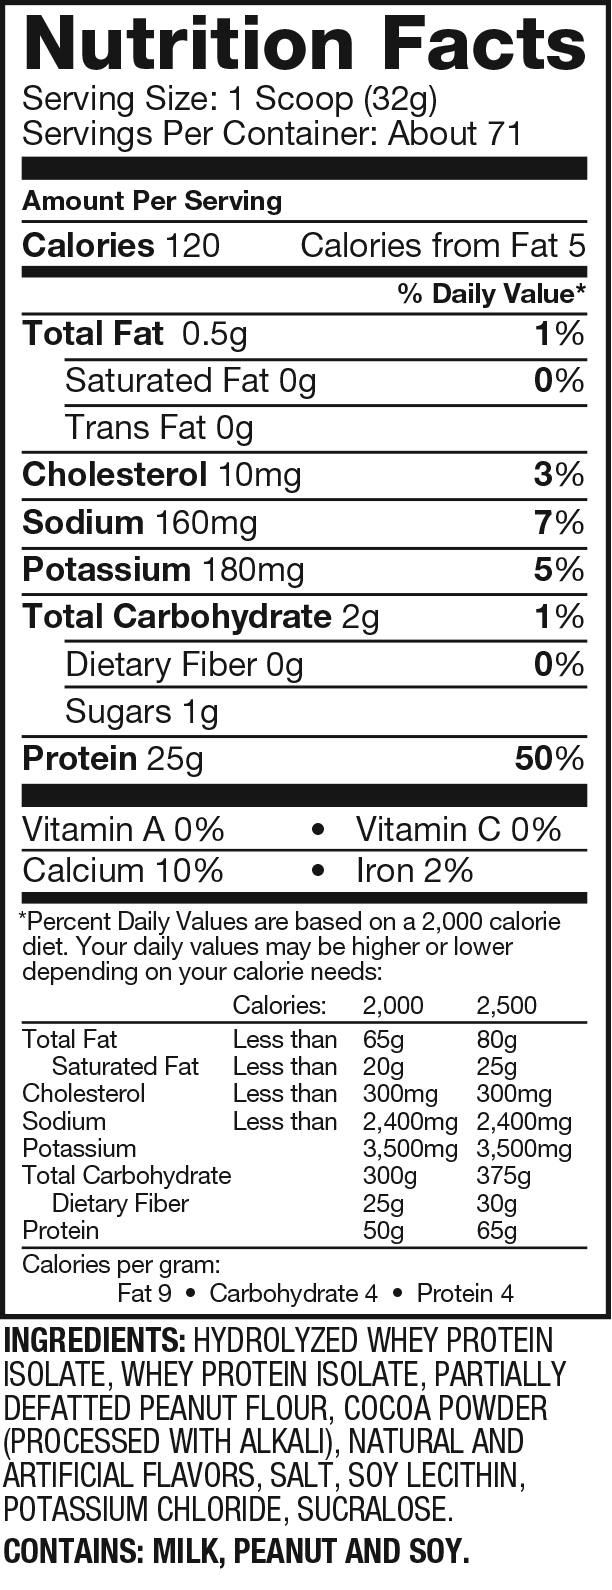 Nutrition facts for a scoop (32g) of protein powder: 120 calories, 0.5g fat, 2g carbs, 1g sugar, 25g protein. Contains milk, peanut, and soy.